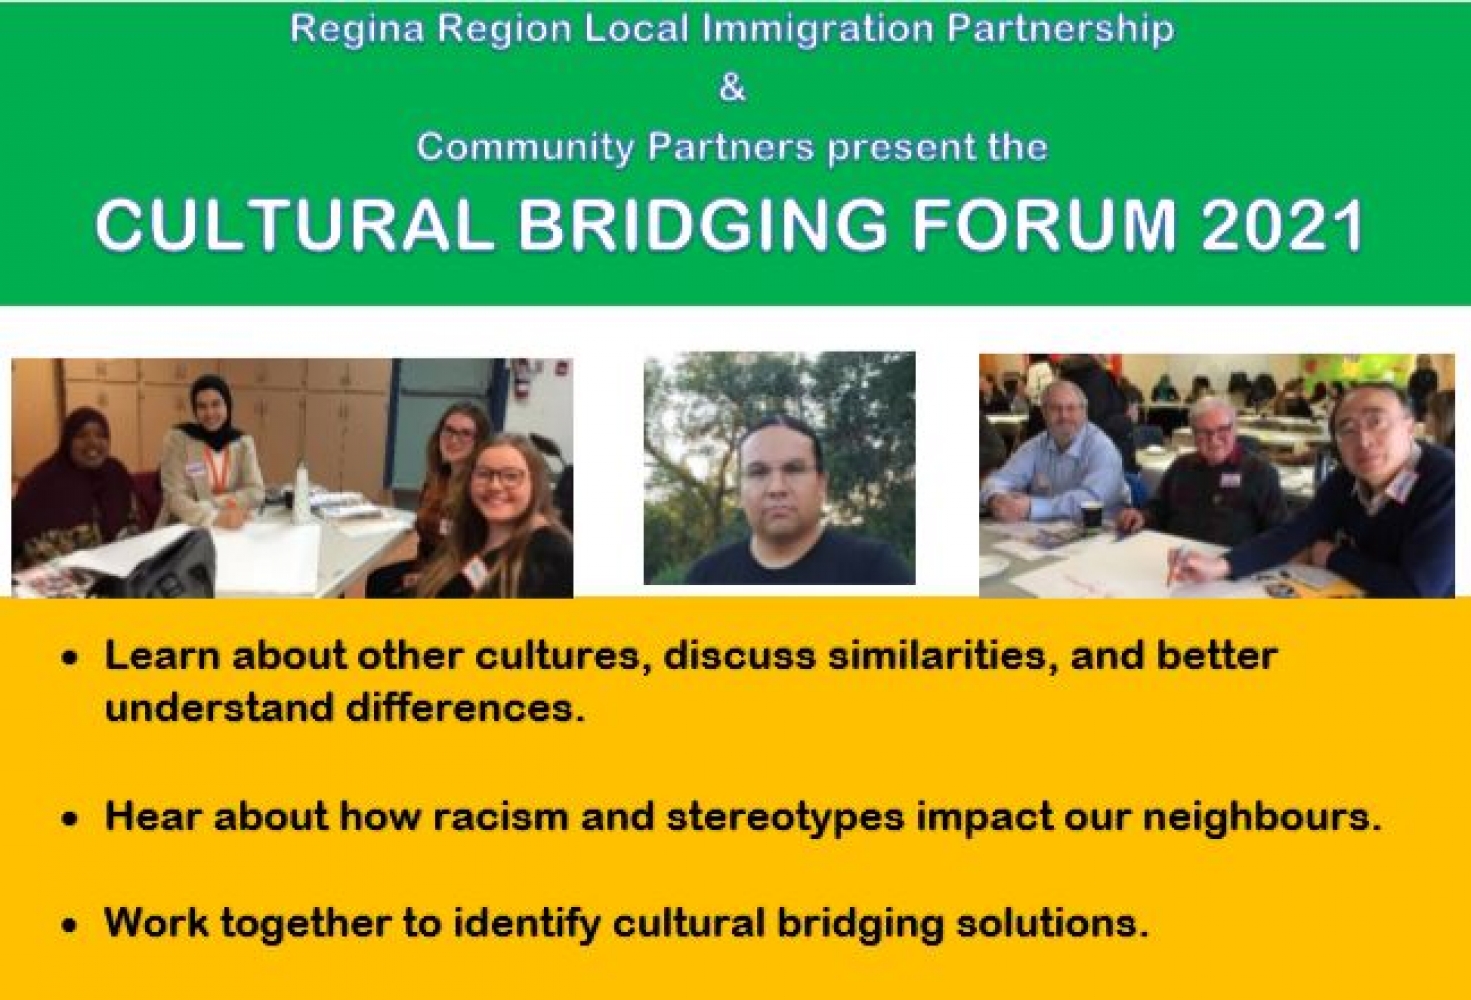 Cultural Bridging Forum is TOMORROW! Last chance to register! 